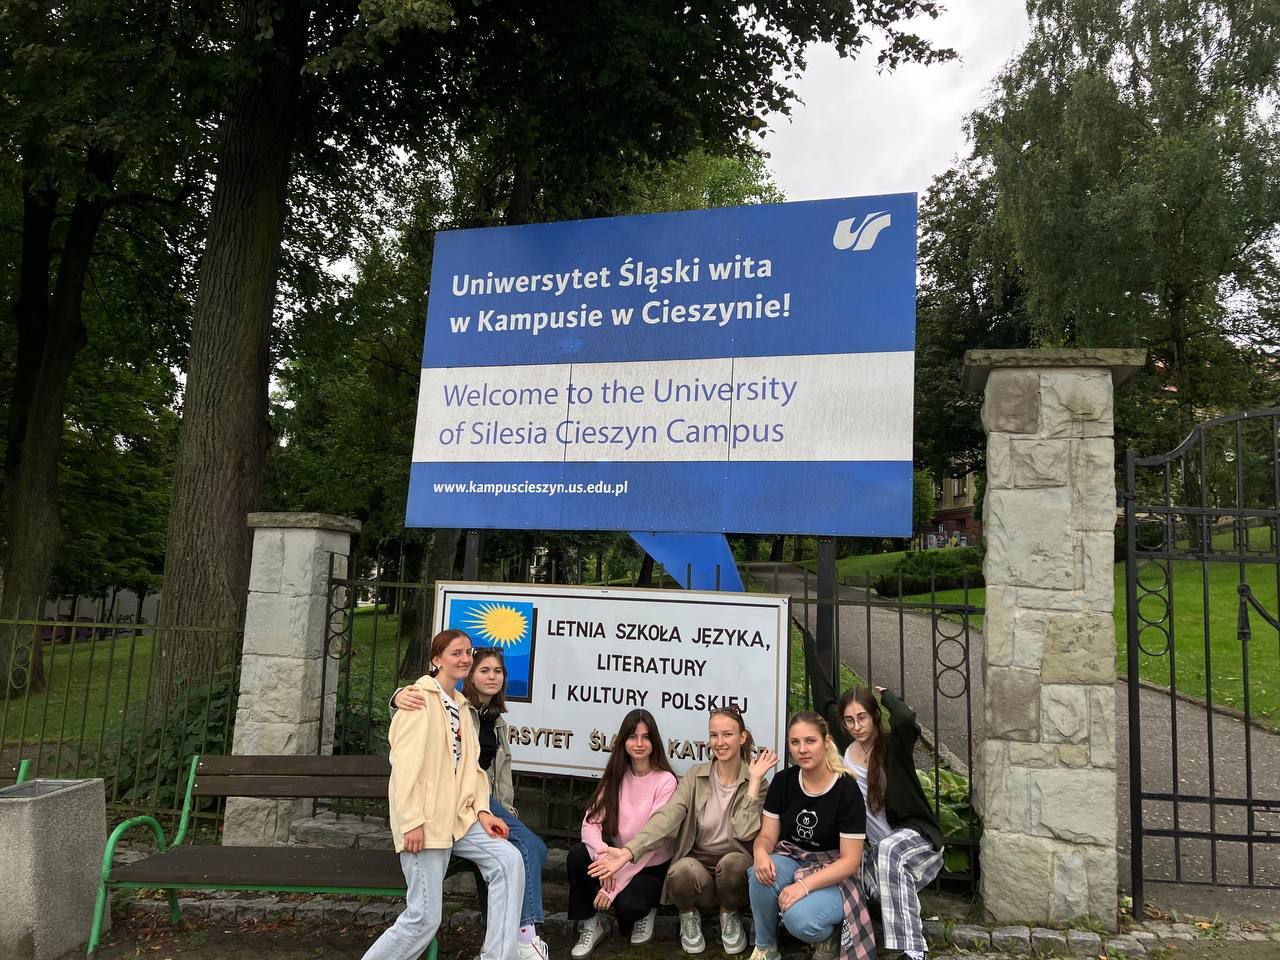 University students complete language intensives at the NAWA Summer School of Polish Language and Culture